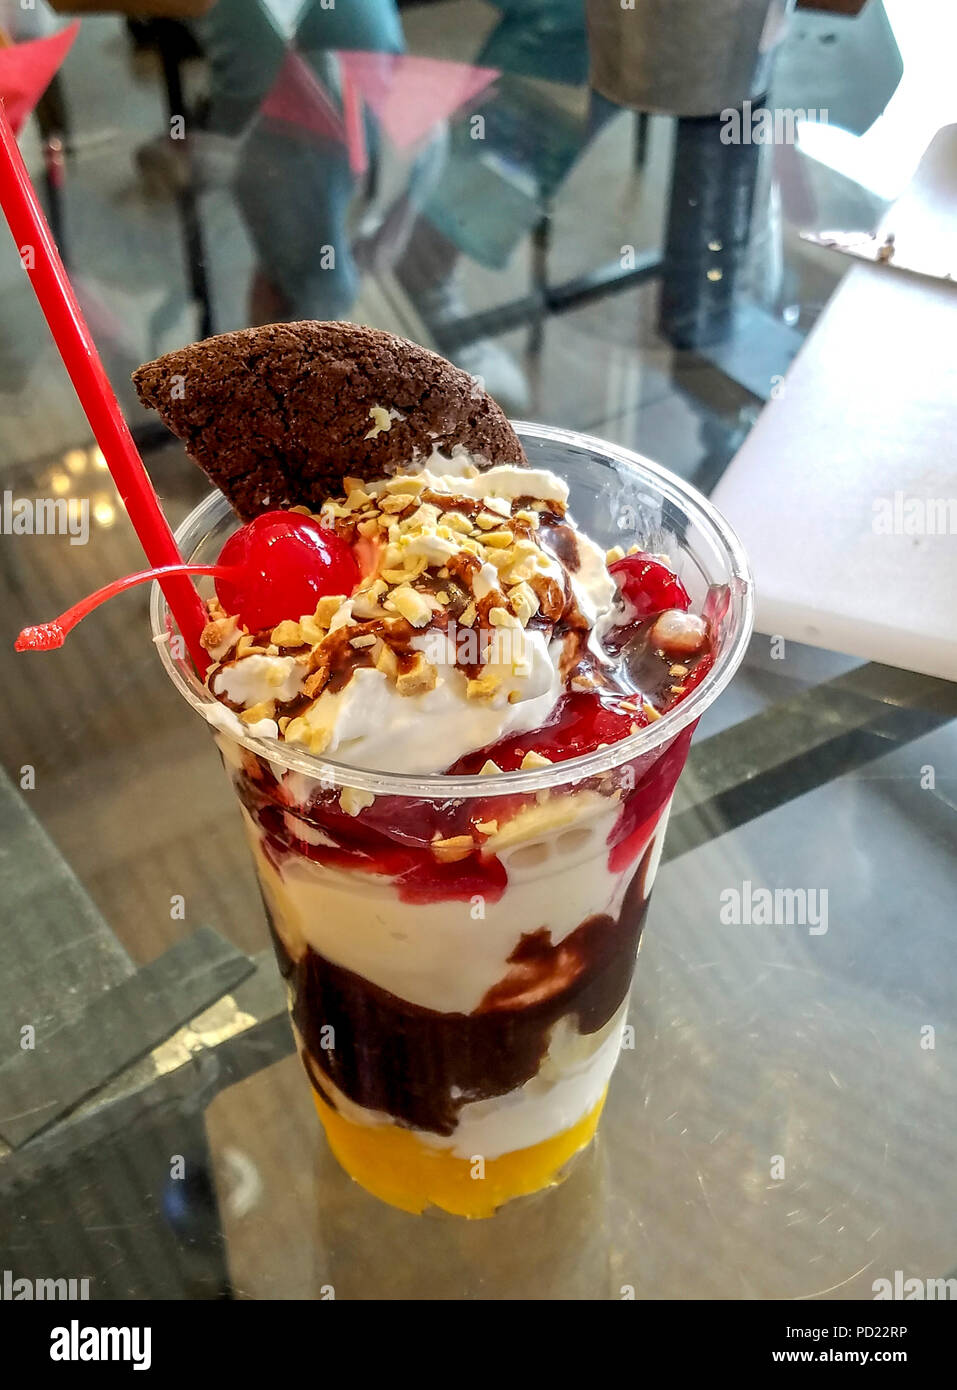 Baked Gorilla, a banana split in a cup...vanilla ice cream, pineapple, strawberries, hot fudge, whipped cream, peanuts & that chocolate cookie. Yes, we ate it all. At Mammoth Fun Shop. Stock Photo